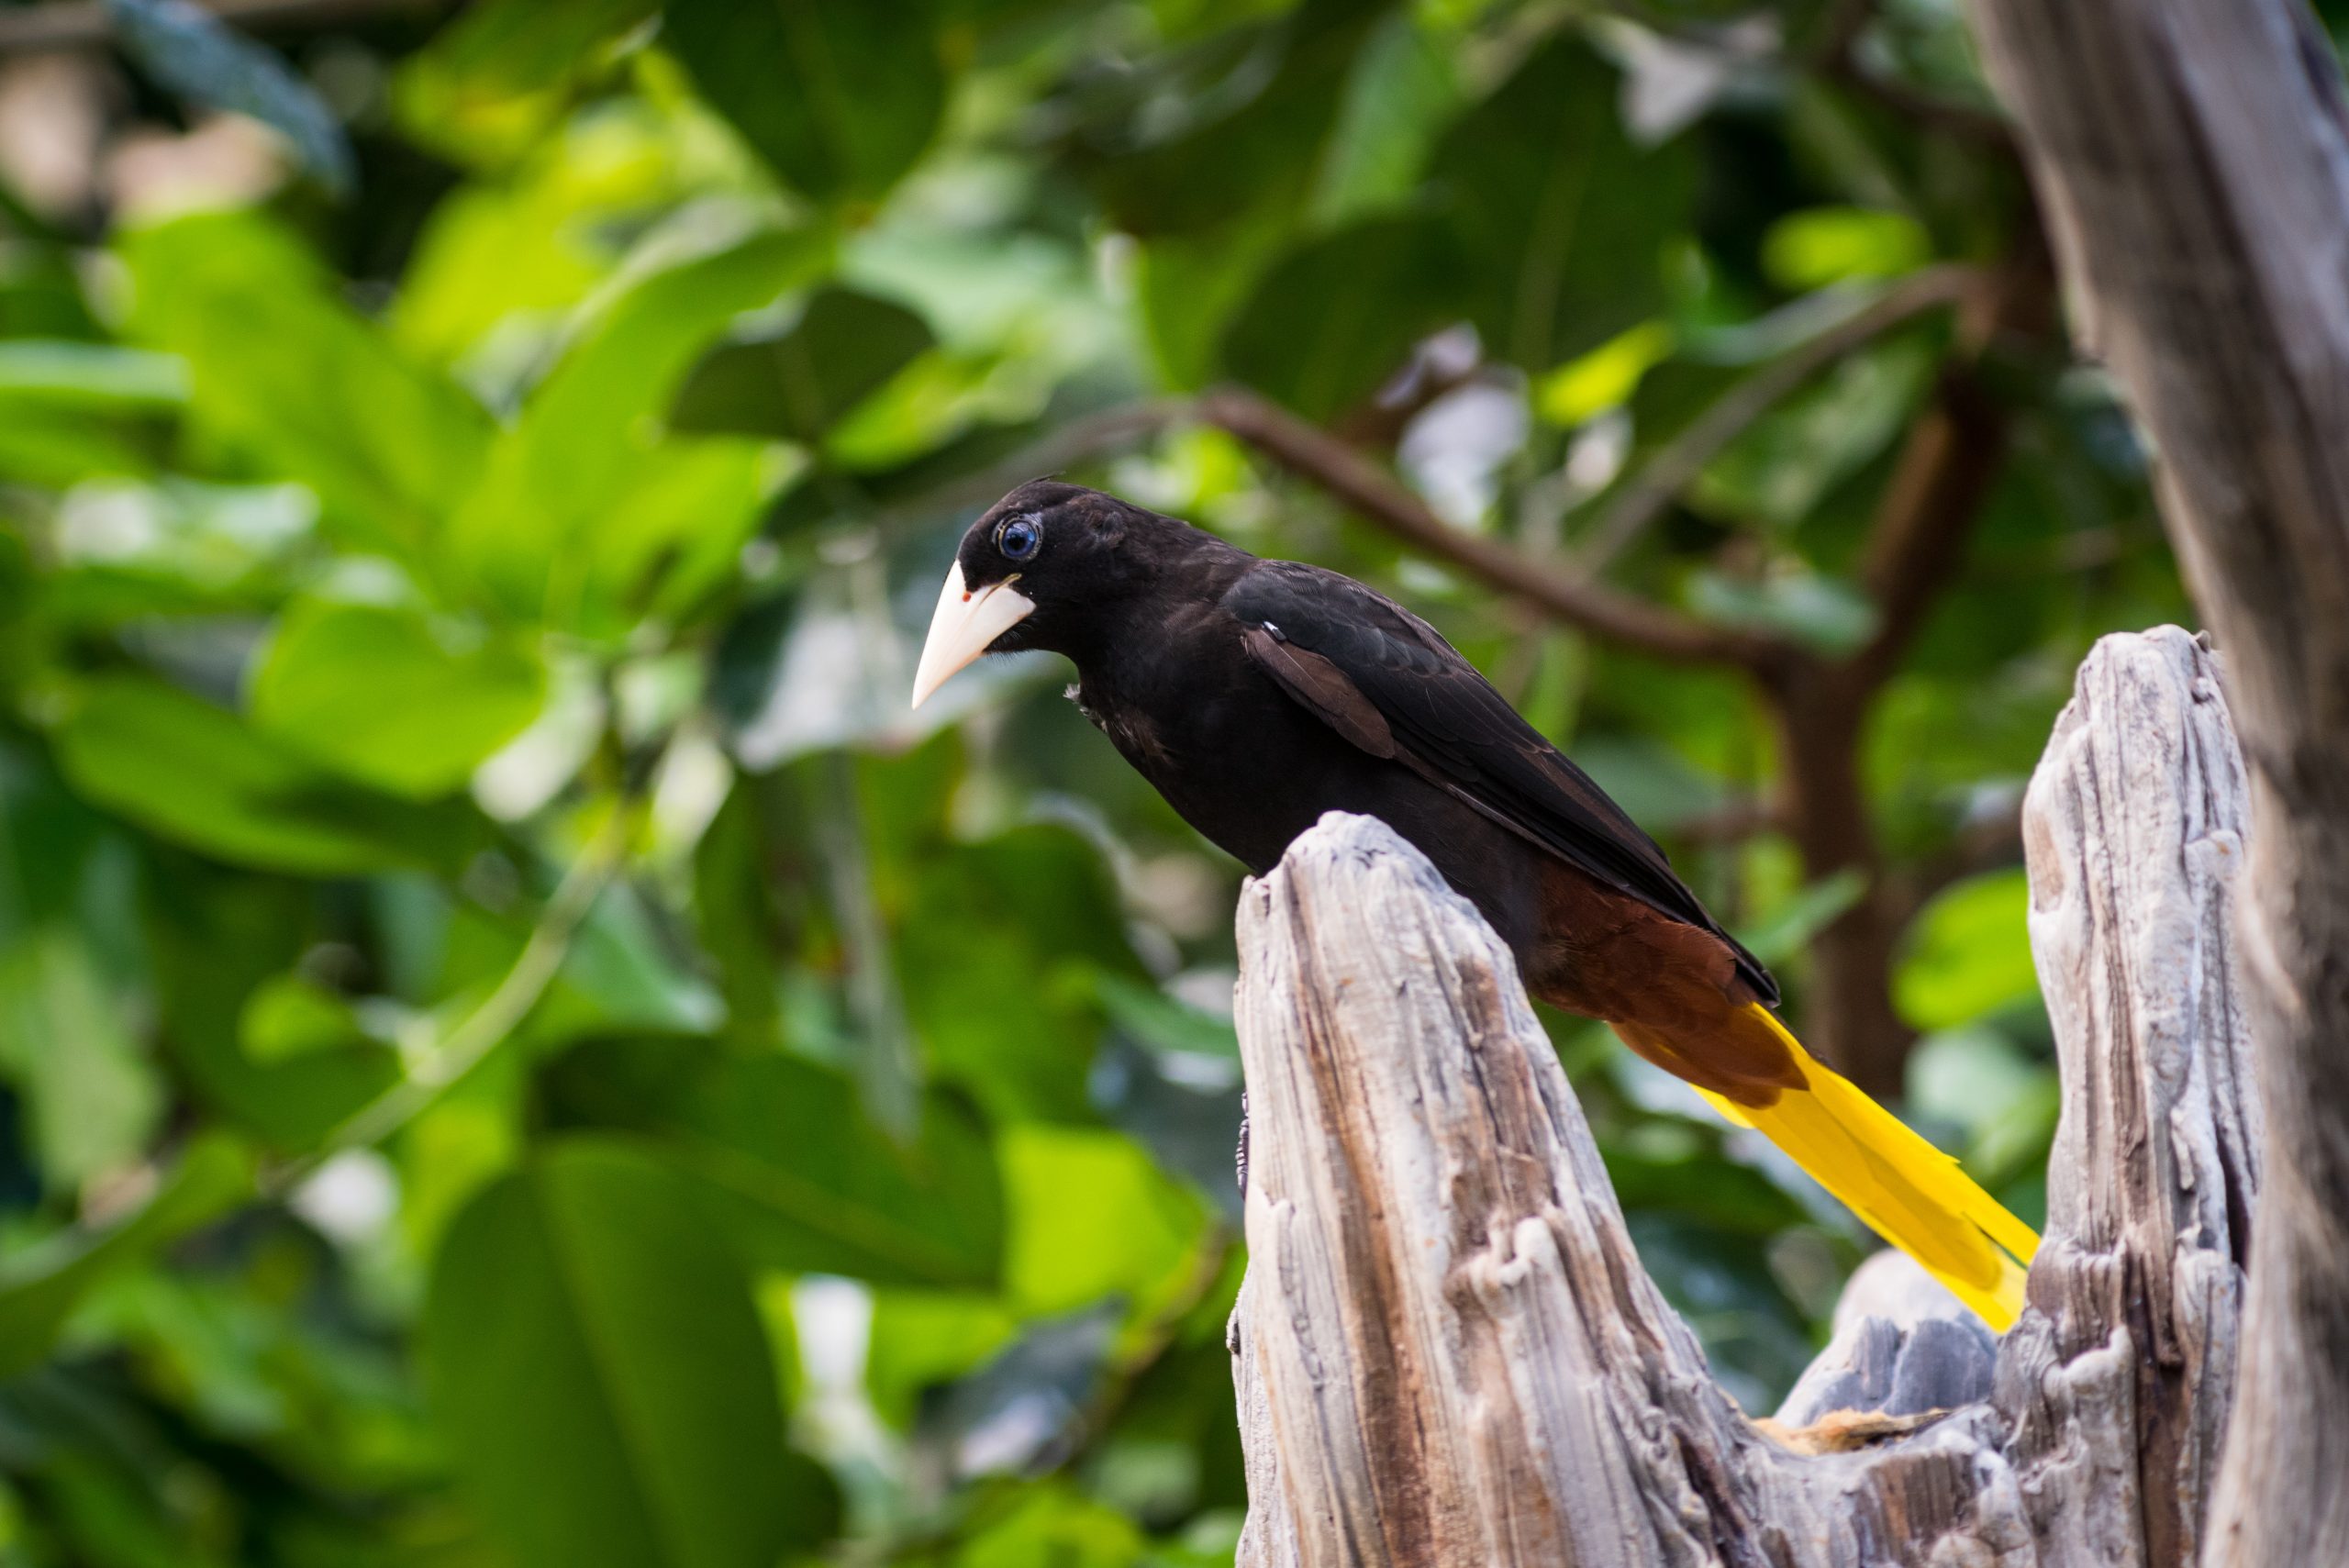 A Crested Oropendola perched on a wooden stump